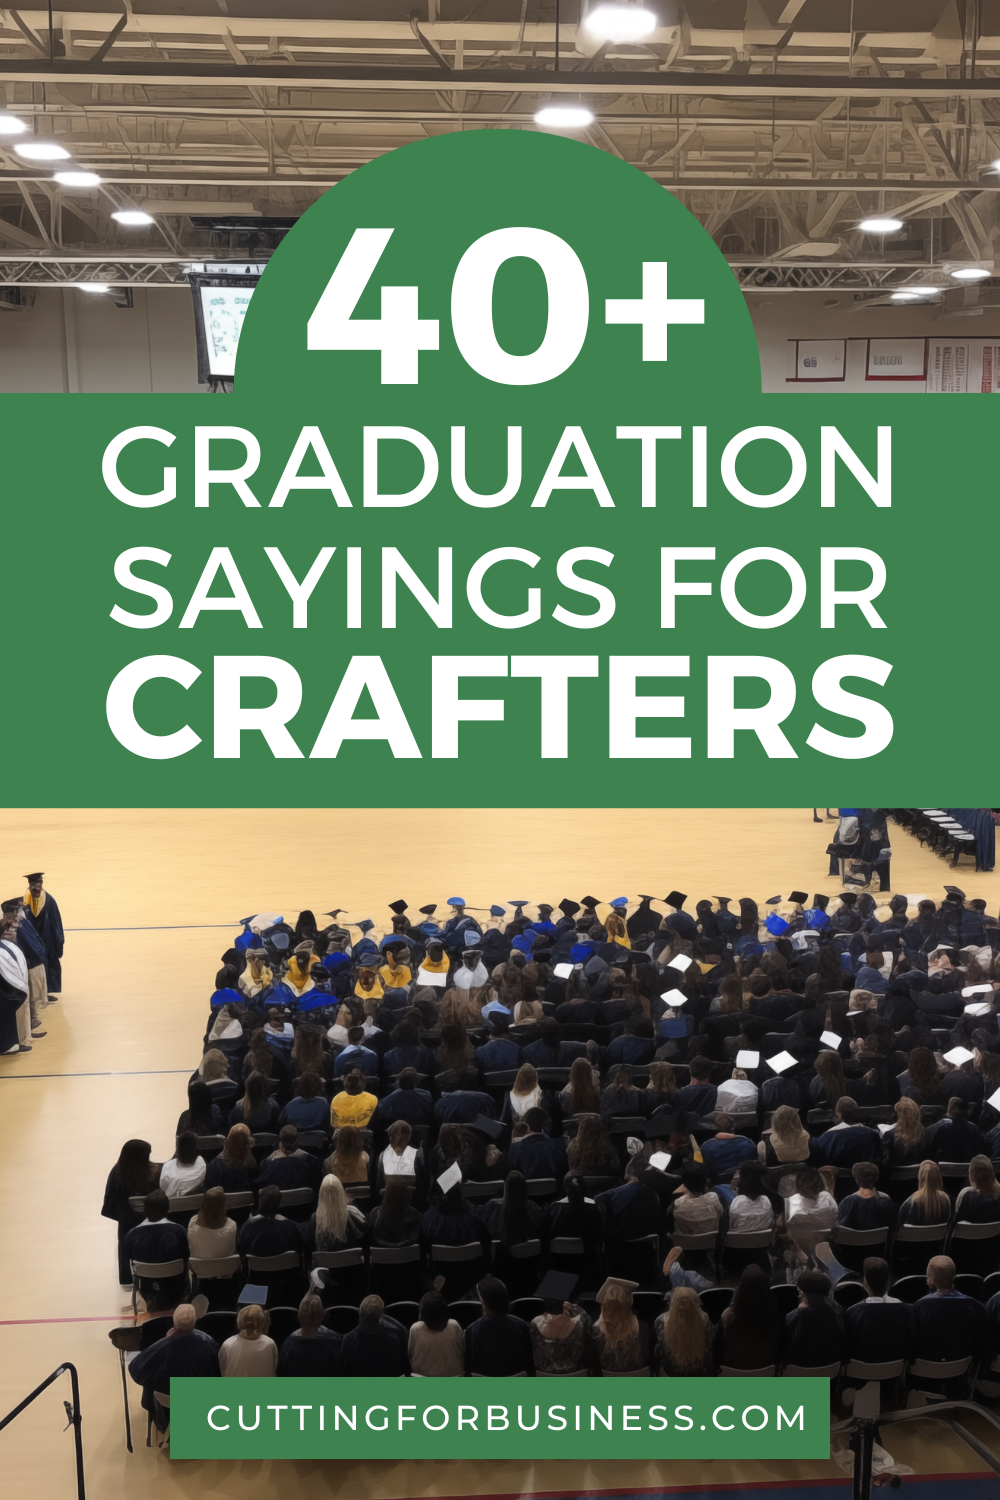 40+ Graduation Sayings for Crafters - cuttingforbusiness.com